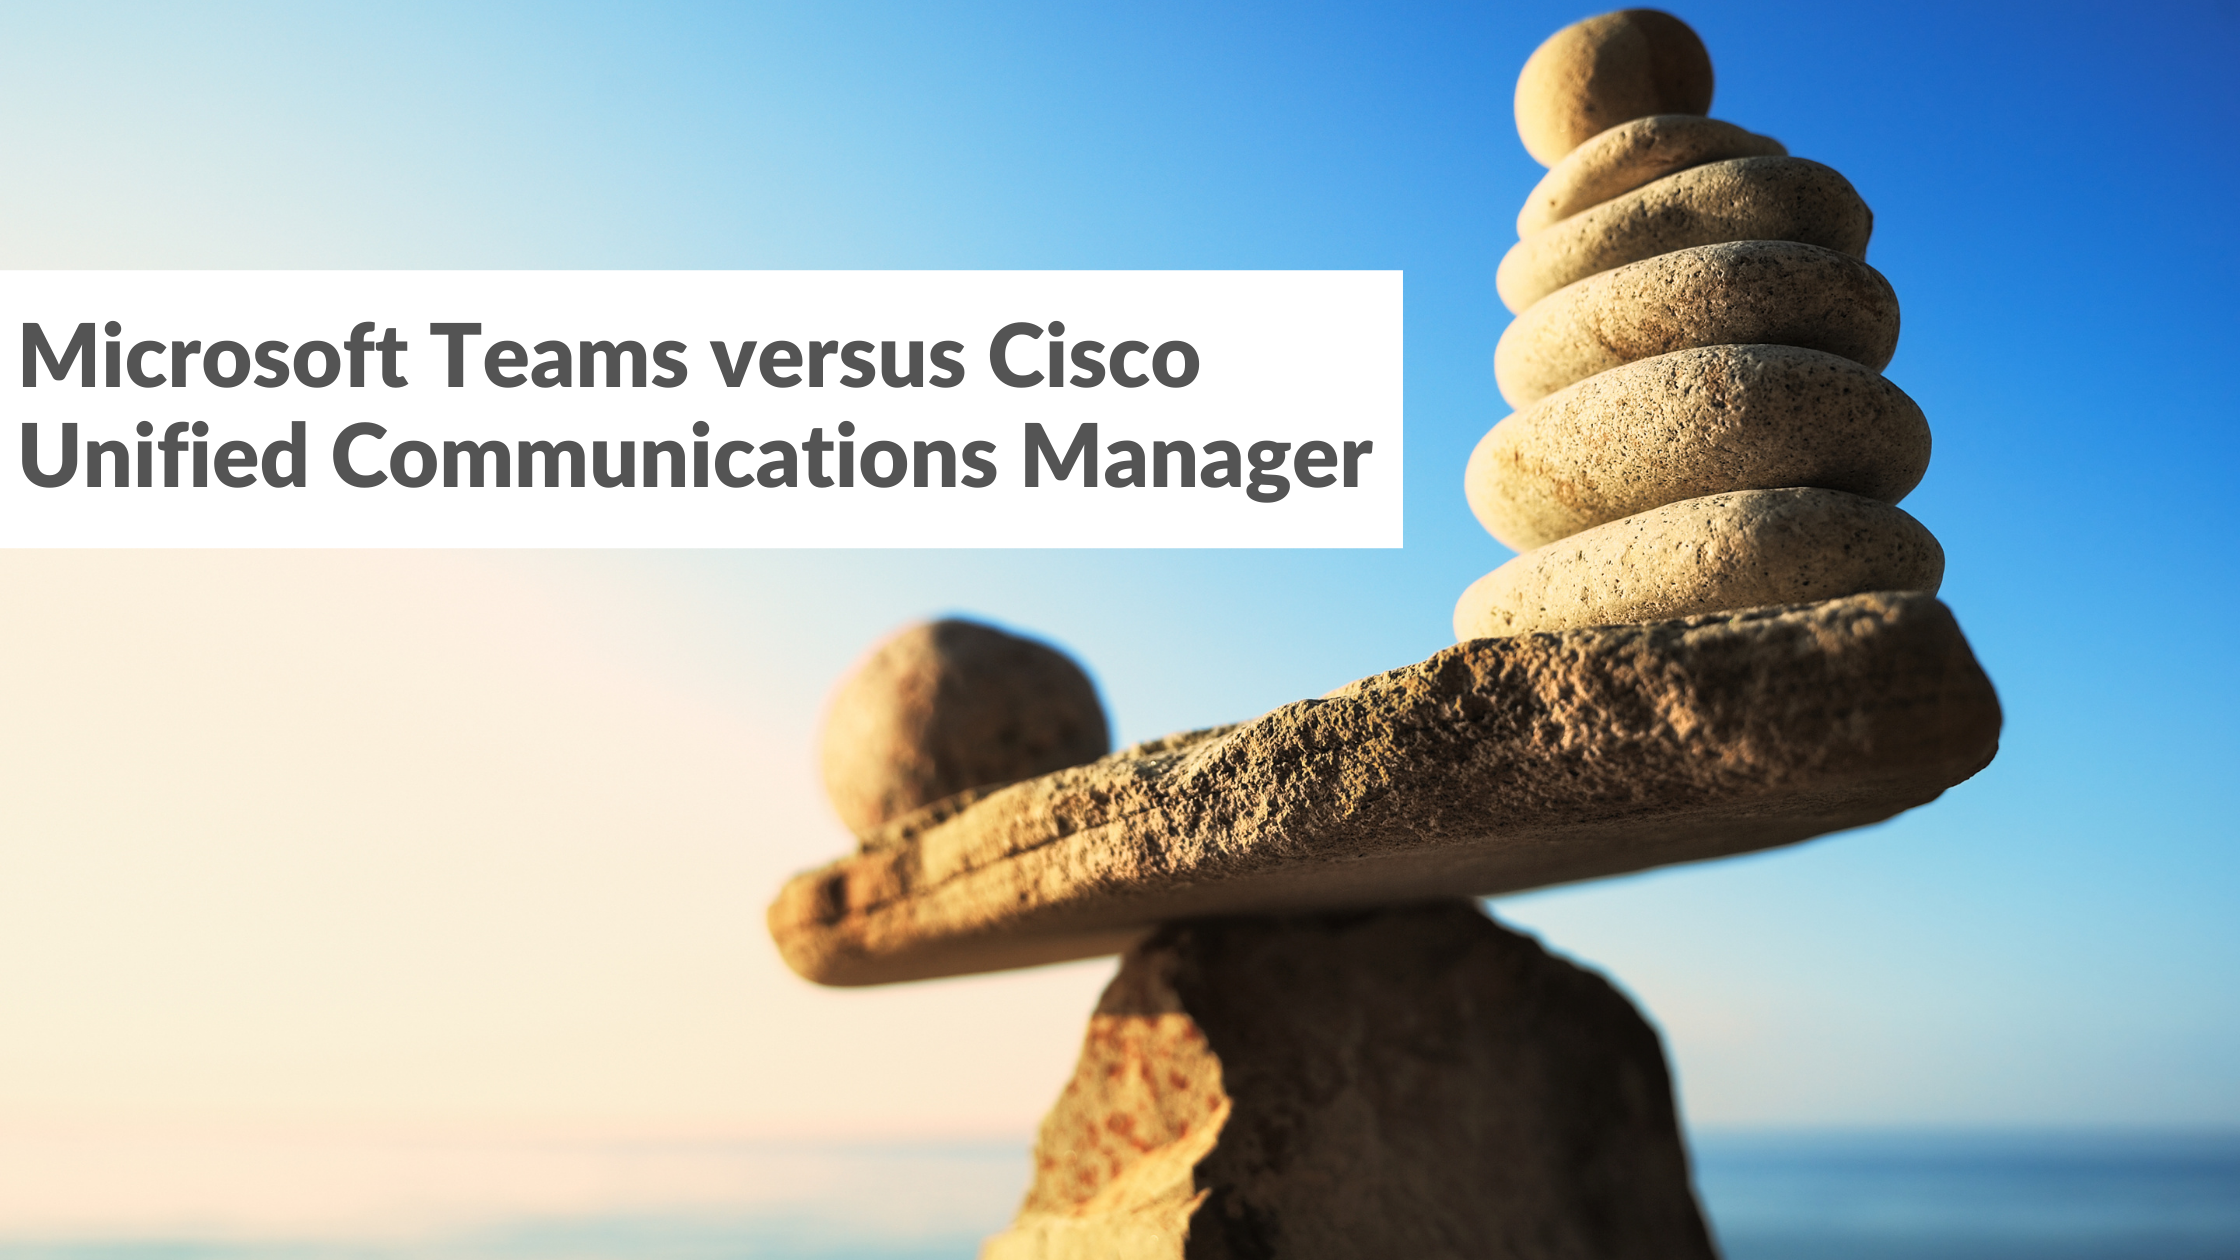 Microsoft Teams versus Cisco Unified Communications Manager